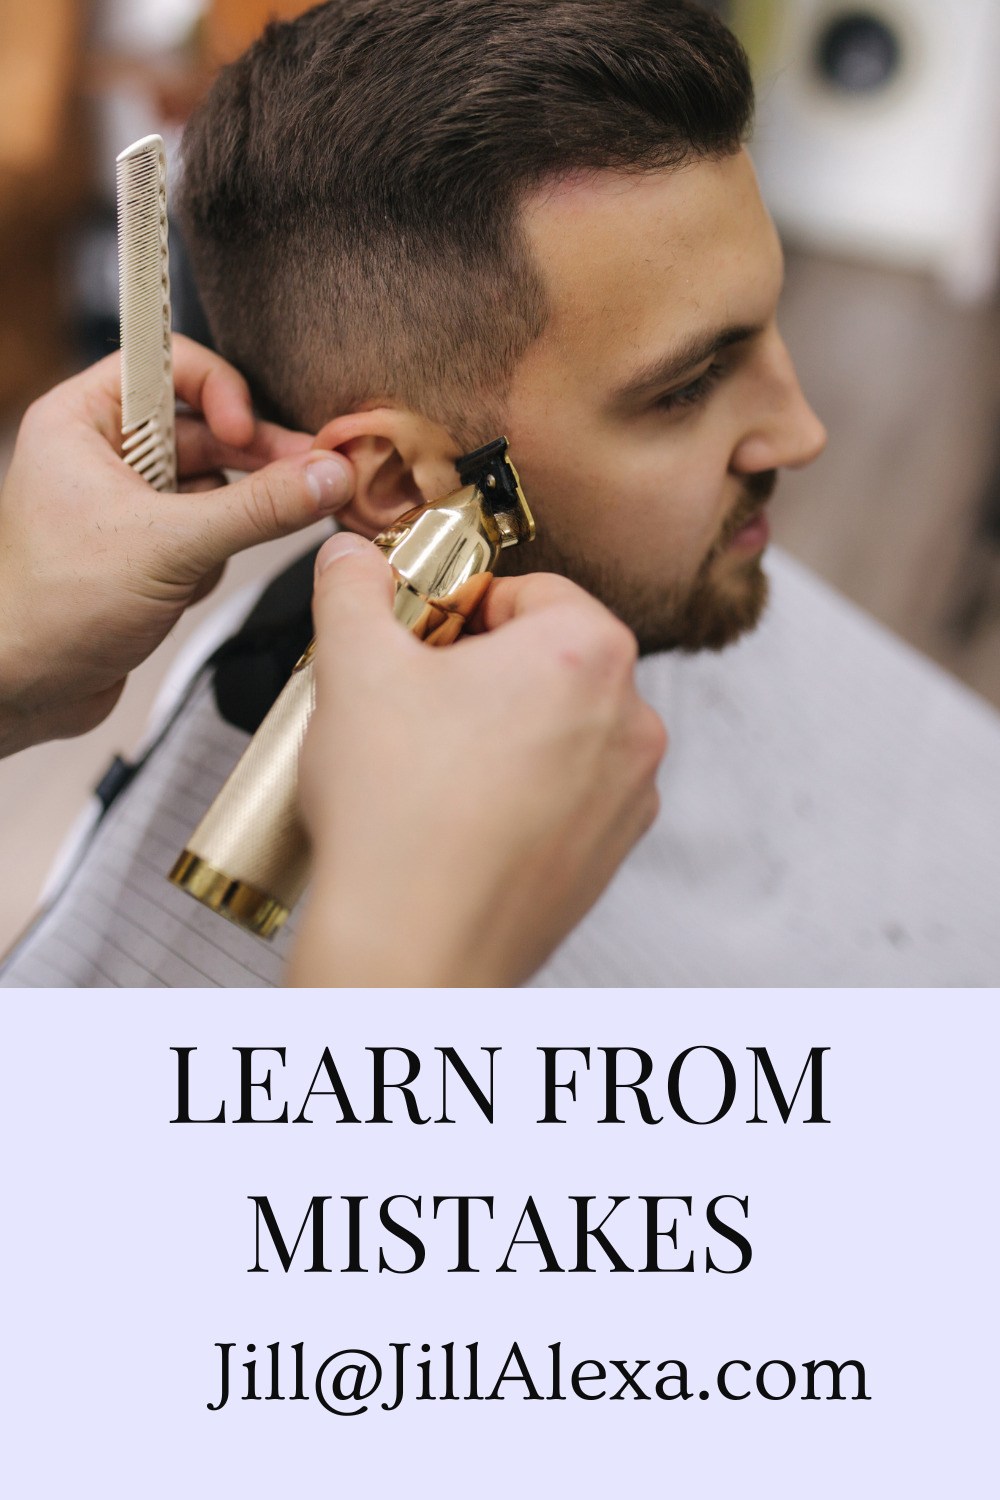 WHAT WE CAN LEARN FROM MISTAKES | LEARN FROM MISTAKES